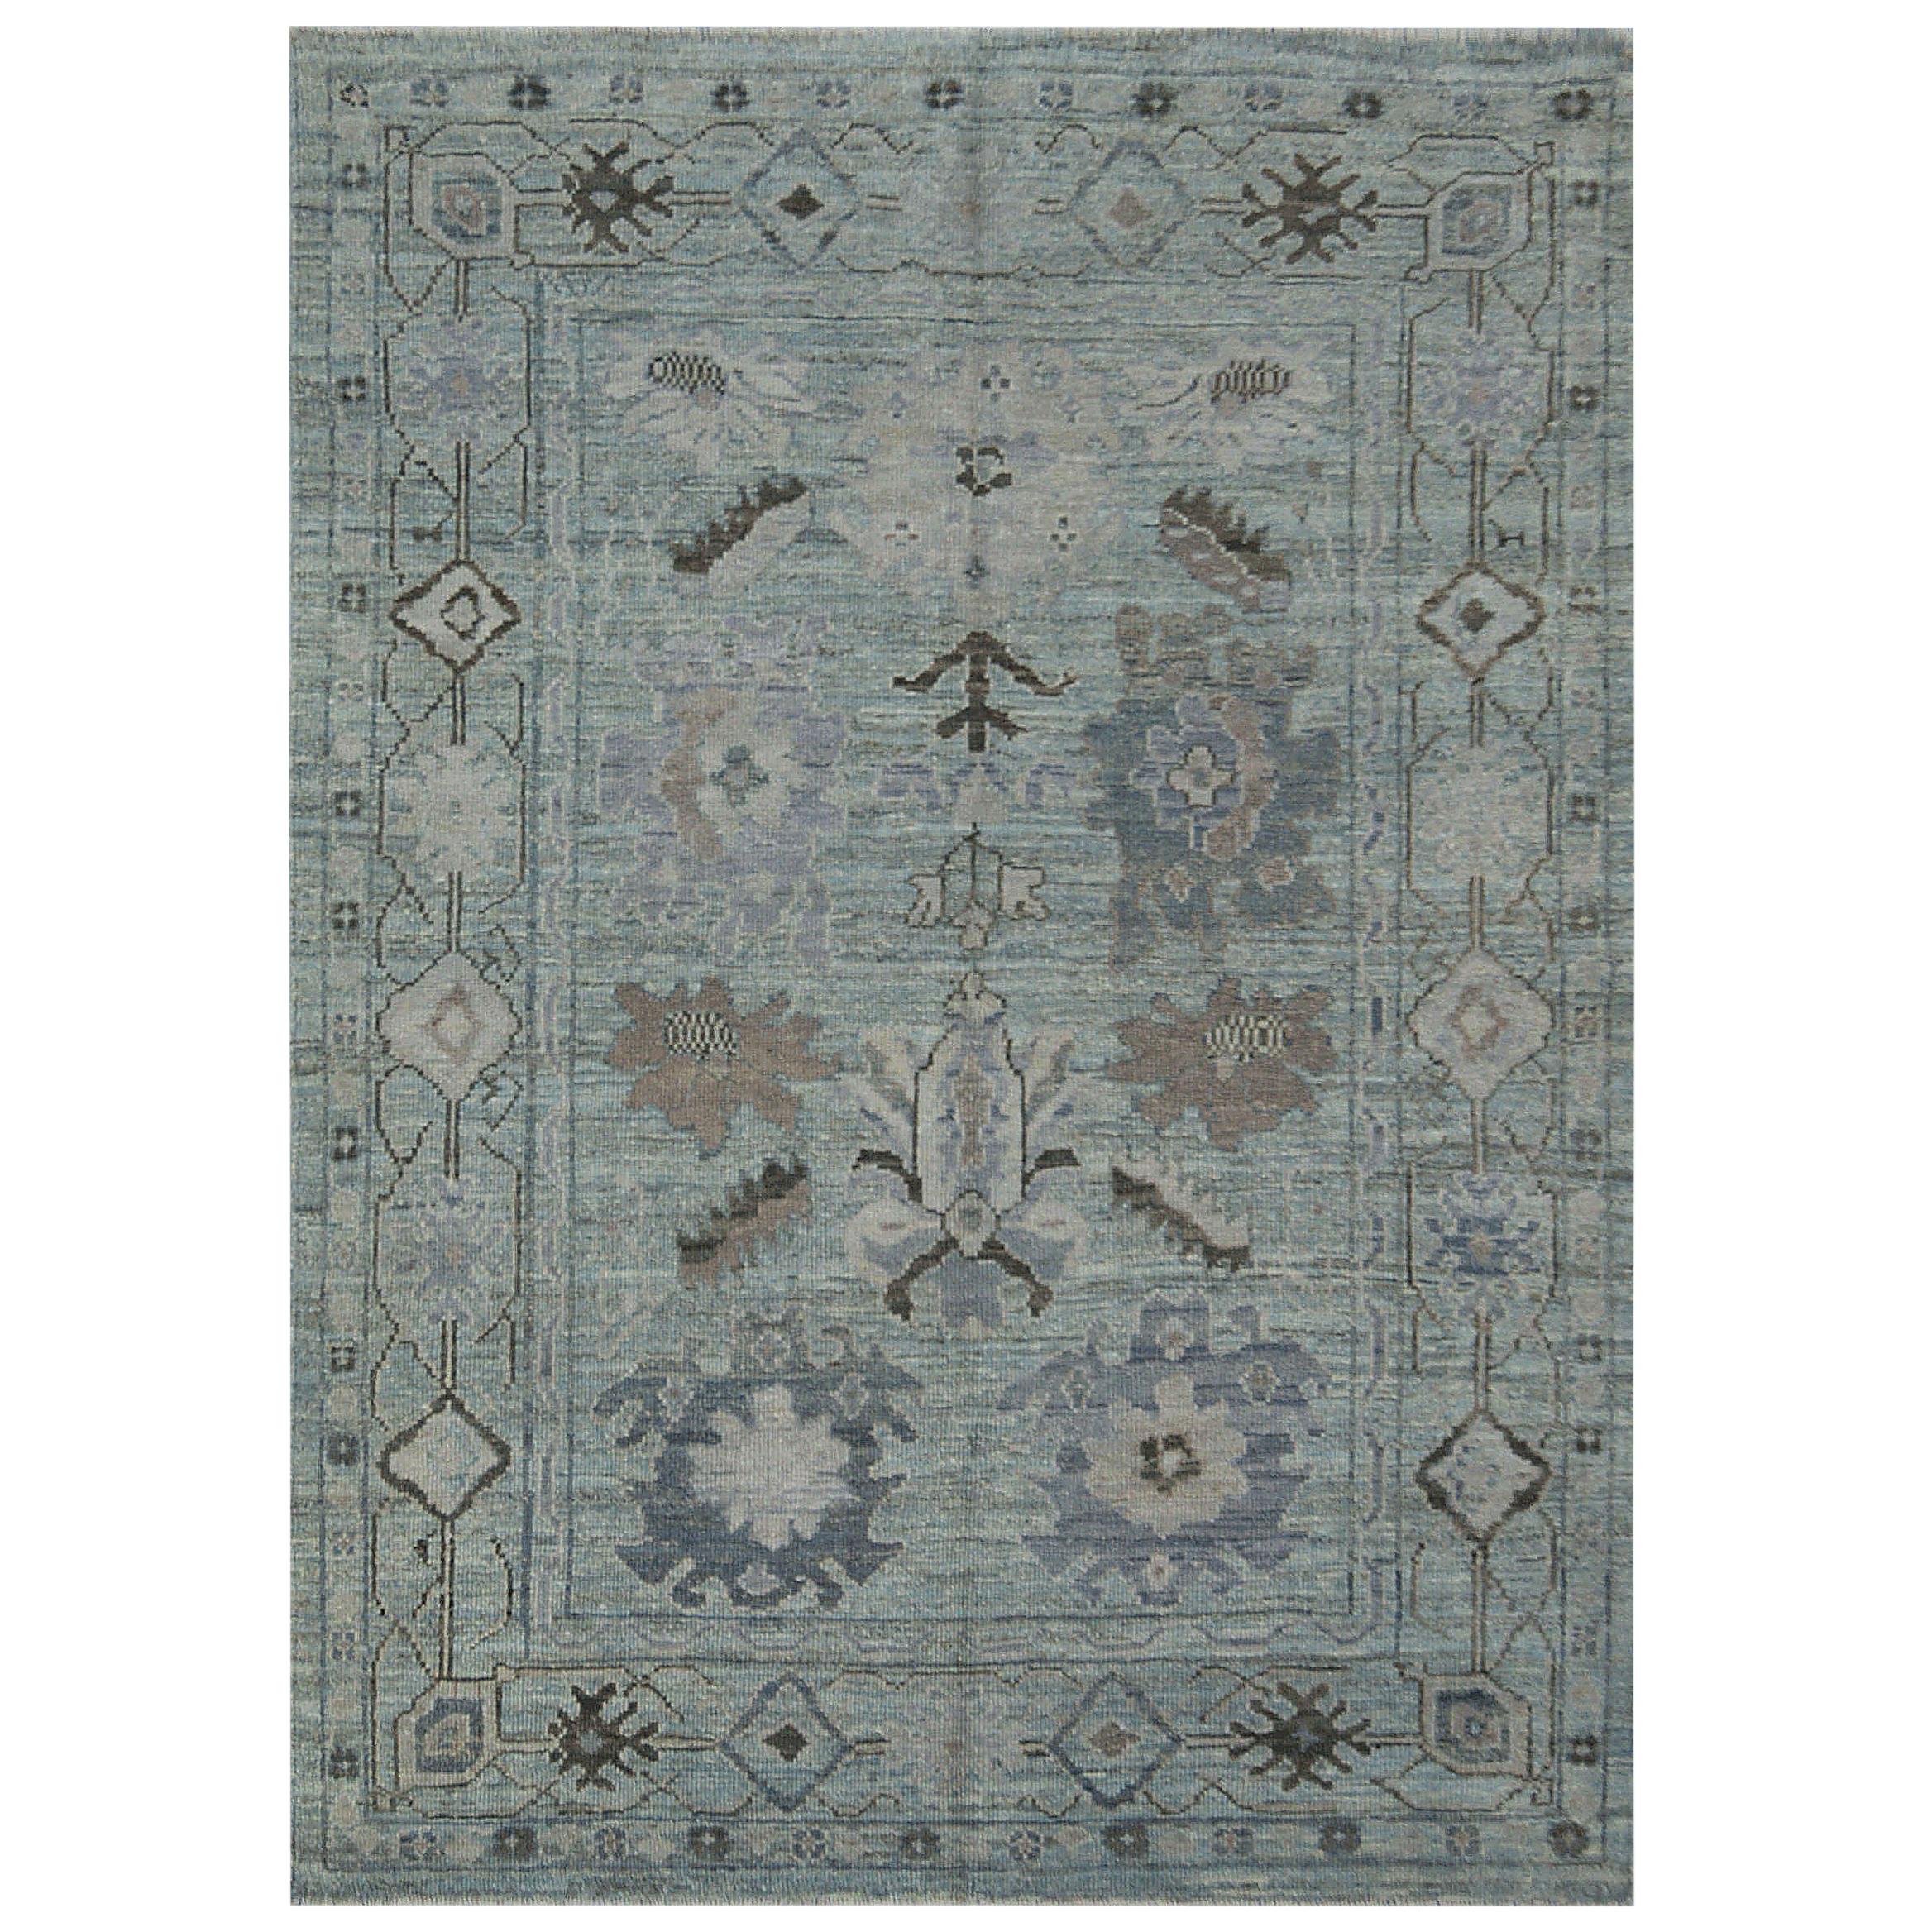 Contemporary Oushak Rug with Blue Field and Floral Patterns in Black and Gray